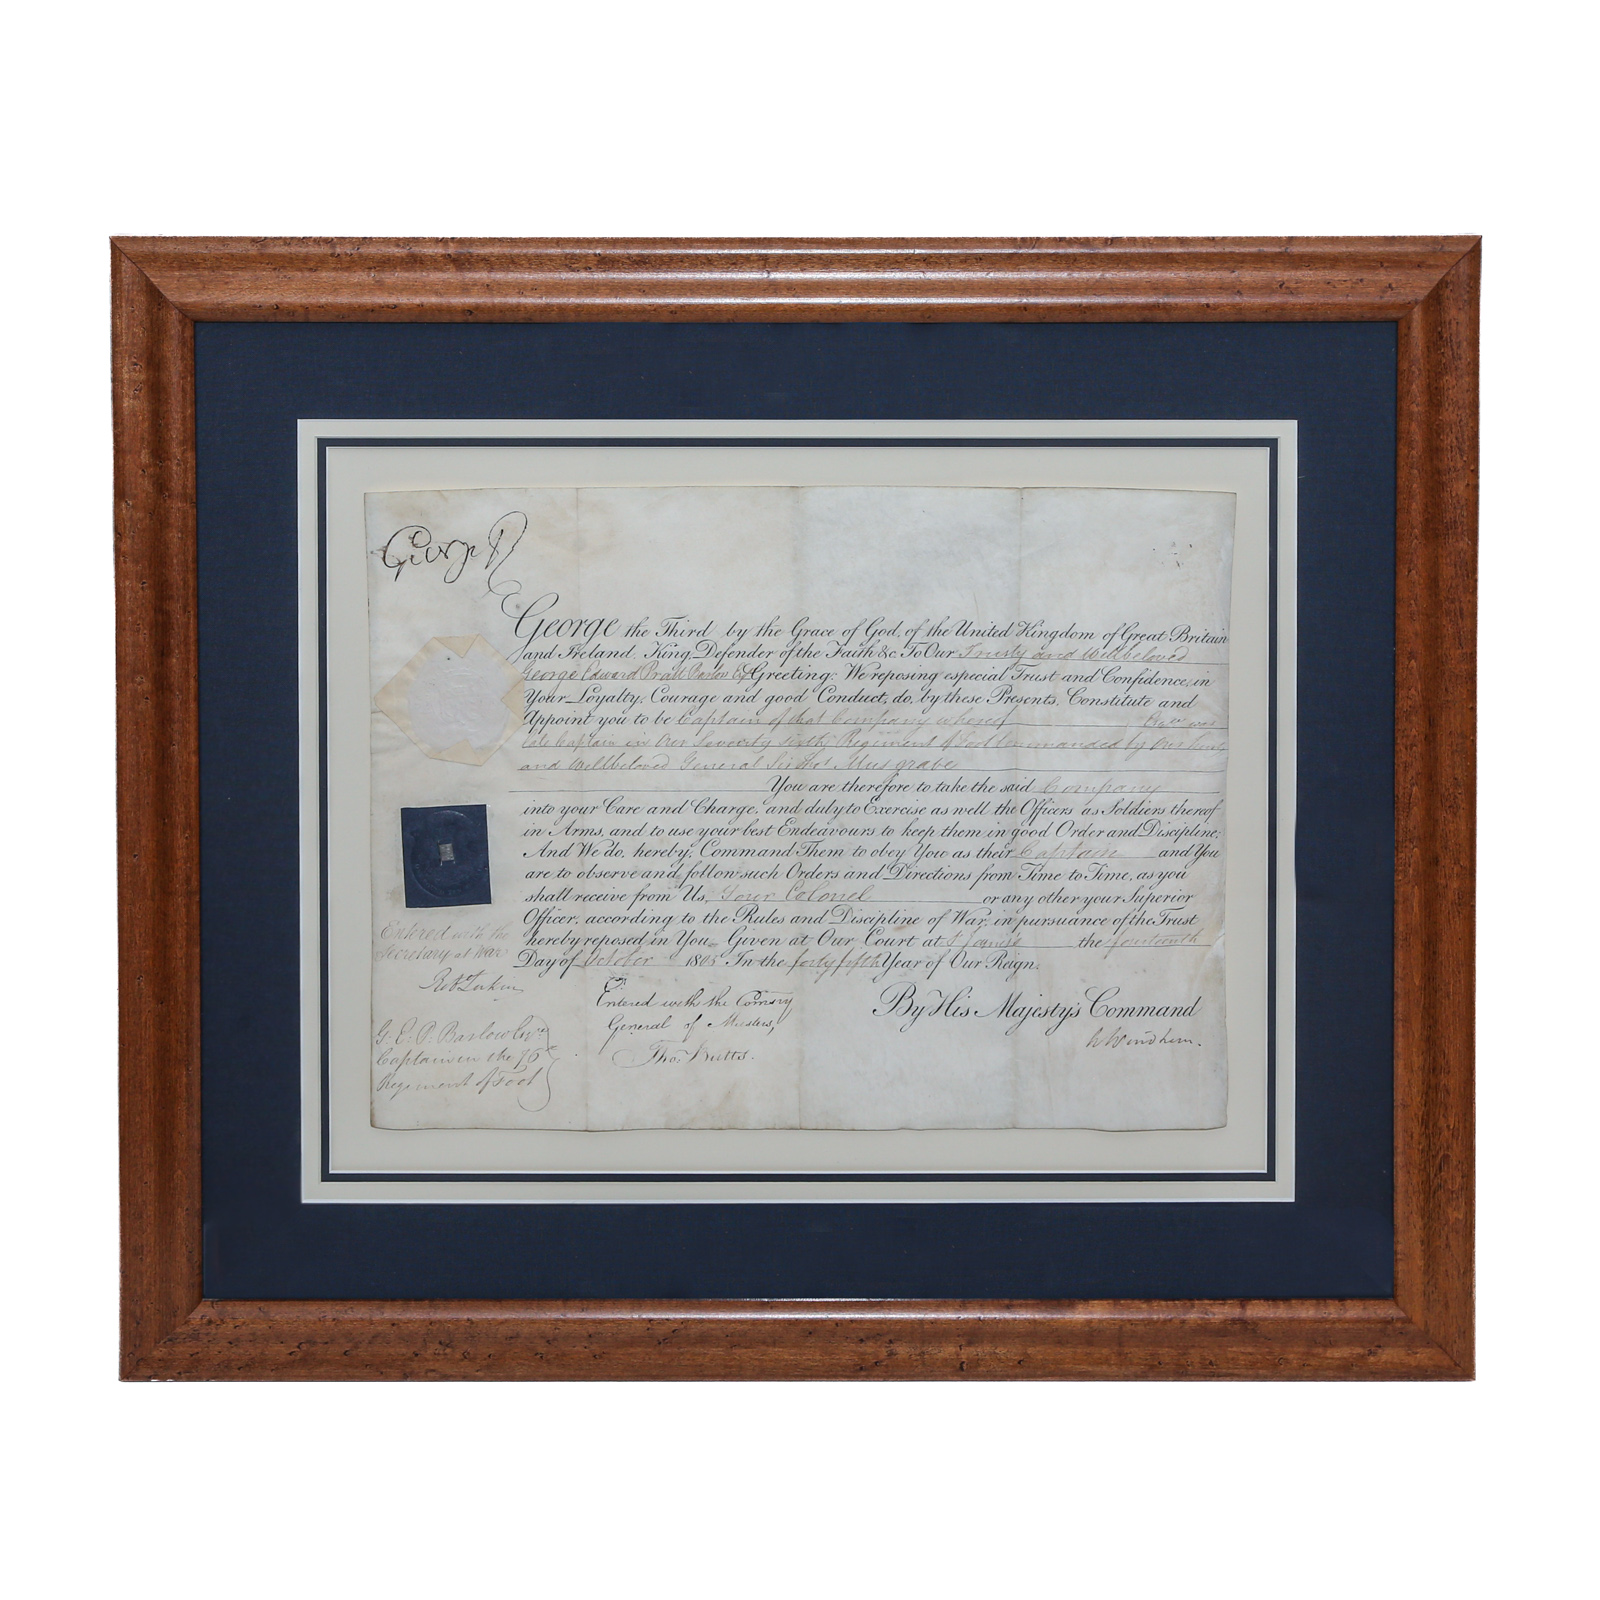 KING GEORGE III SIGNED COMMISSION  3cb723